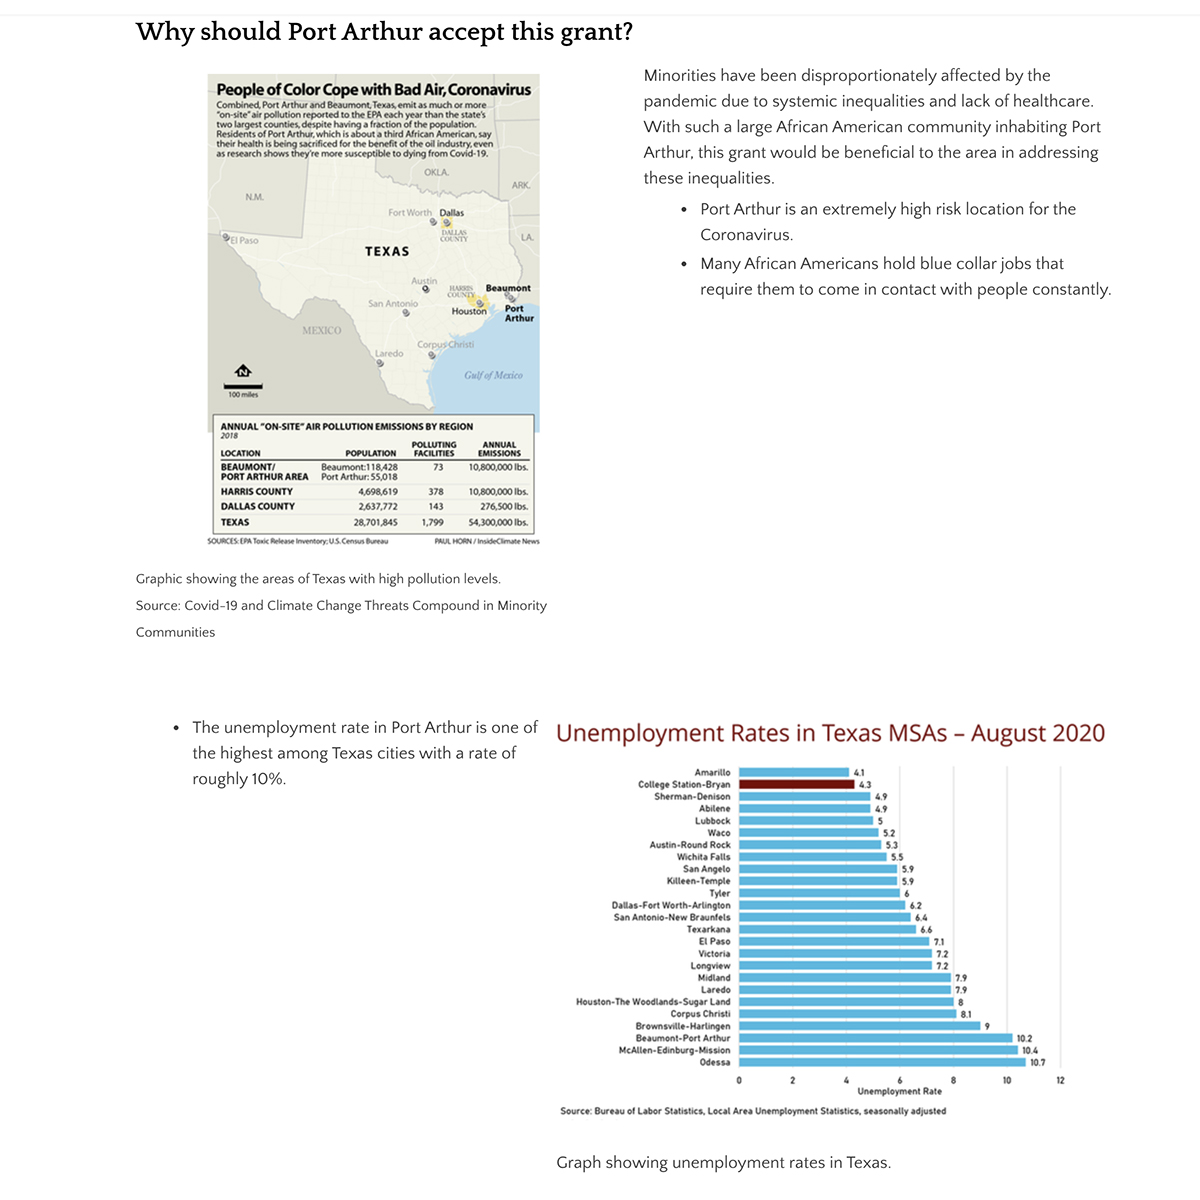 Visual example of how Abby Hoffpauir presented this coursework in ePortfolio: Shows two graphics, one depicting "Annual 'On-Site' Air Pollution Emissions by Region" and a second depicting "Unemployment Rates in Texas MSAs - August 2020," accompanied by explanations tying the findings to the project. 